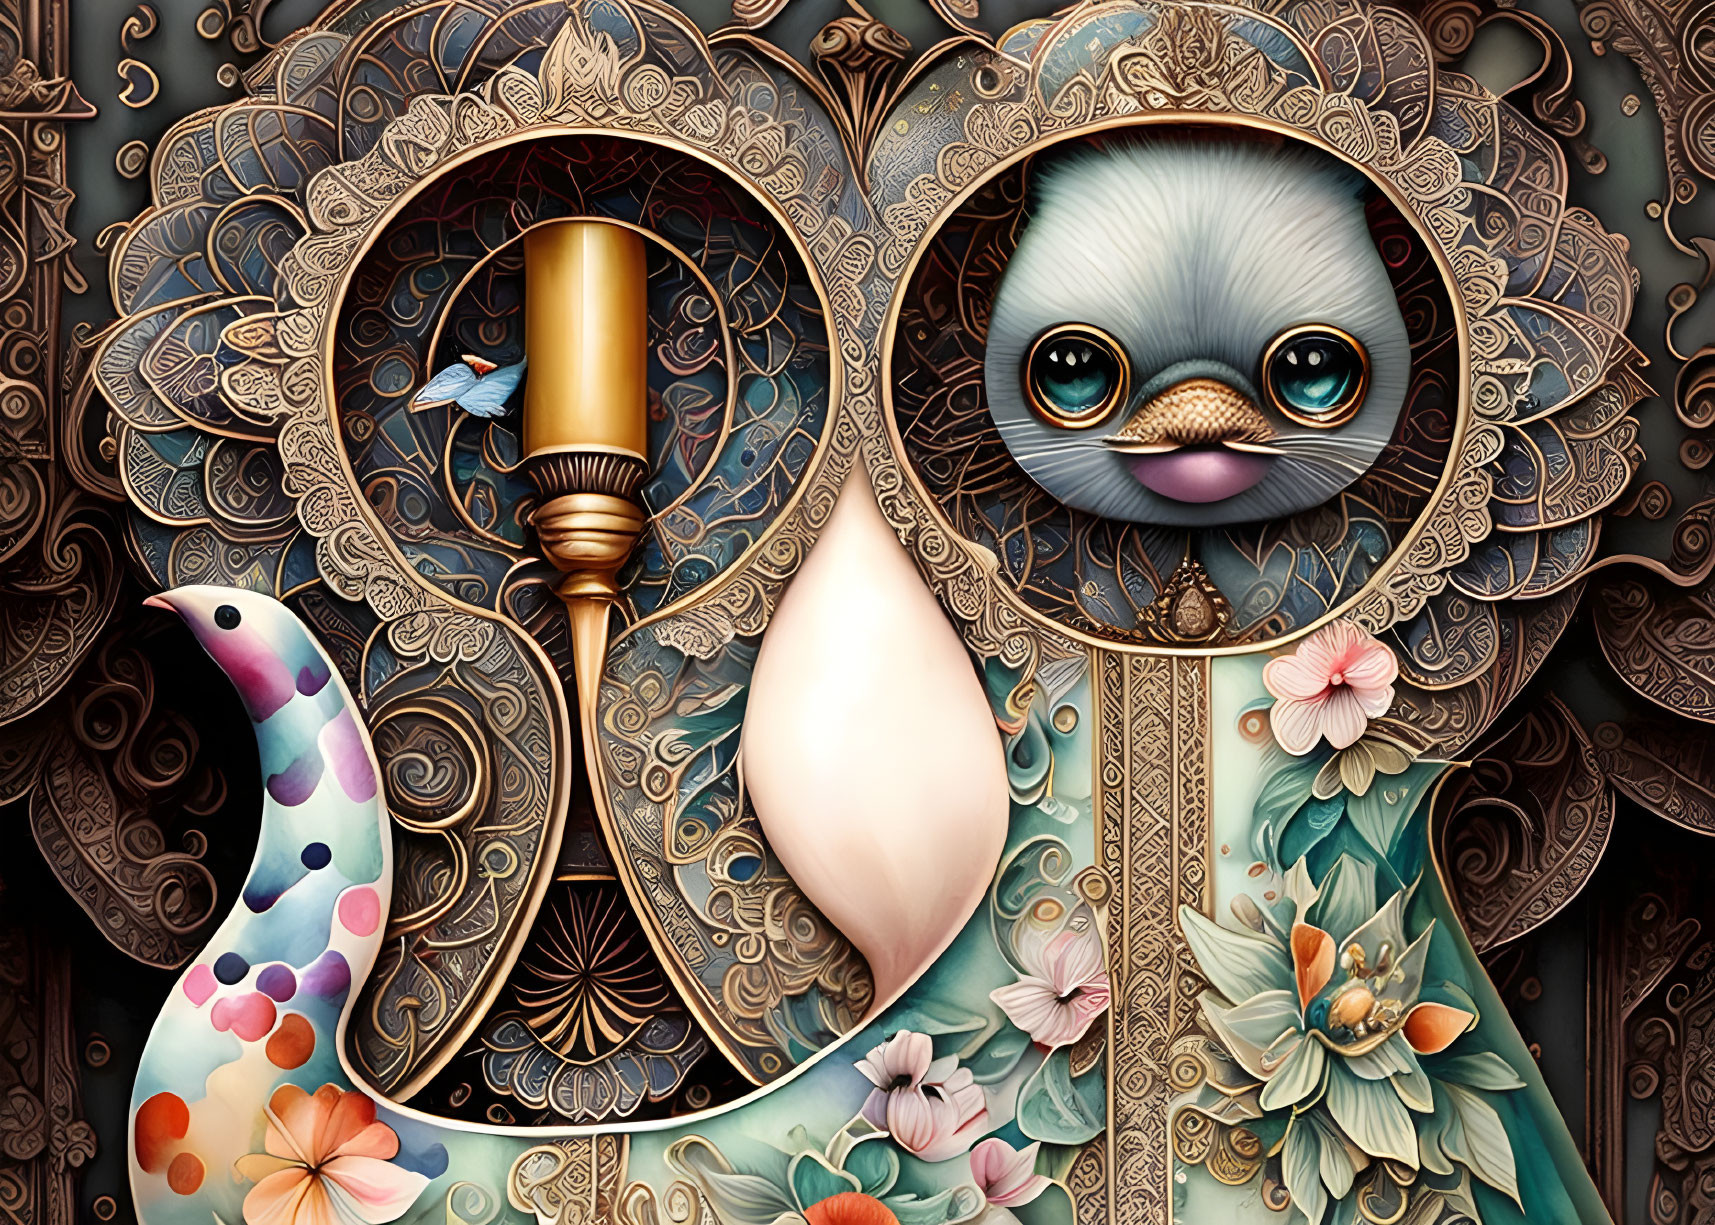 Whimsical artwork with stylized seal in ornate golden frames and floral motifs.